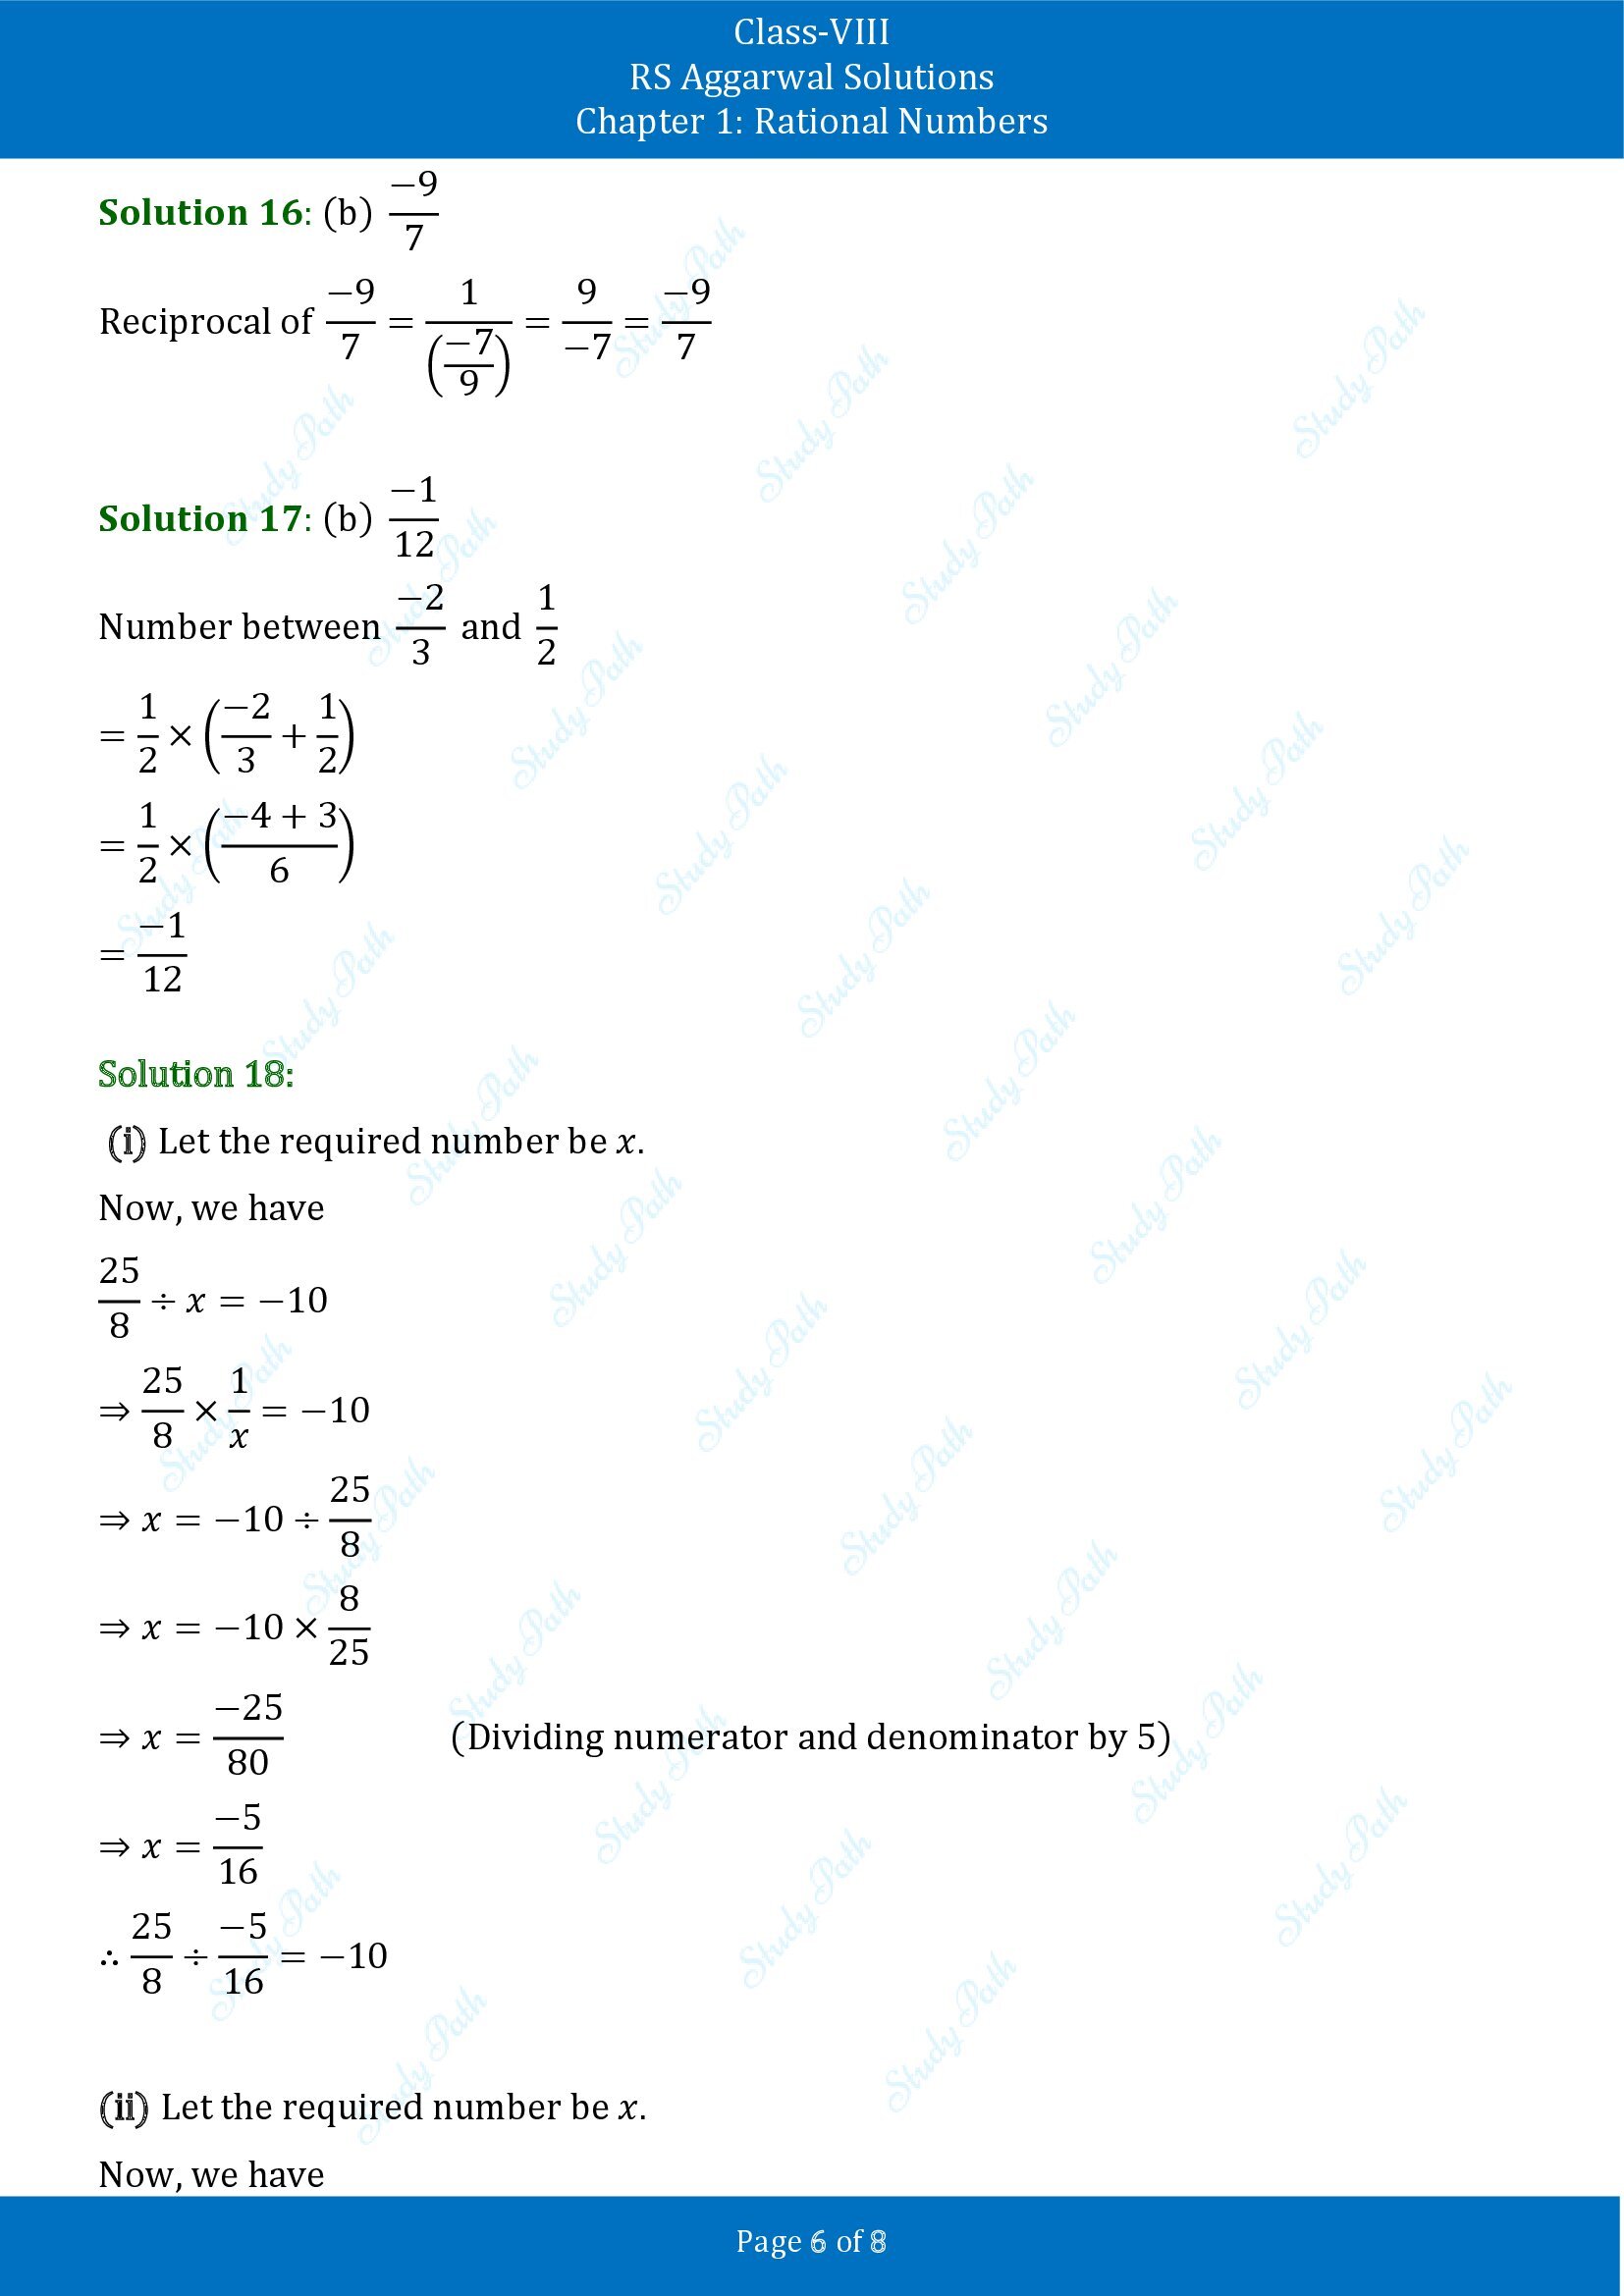 RS Aggarwal Solutions Class 8 Chapter 1 Rational Numbers Test Paper 00006